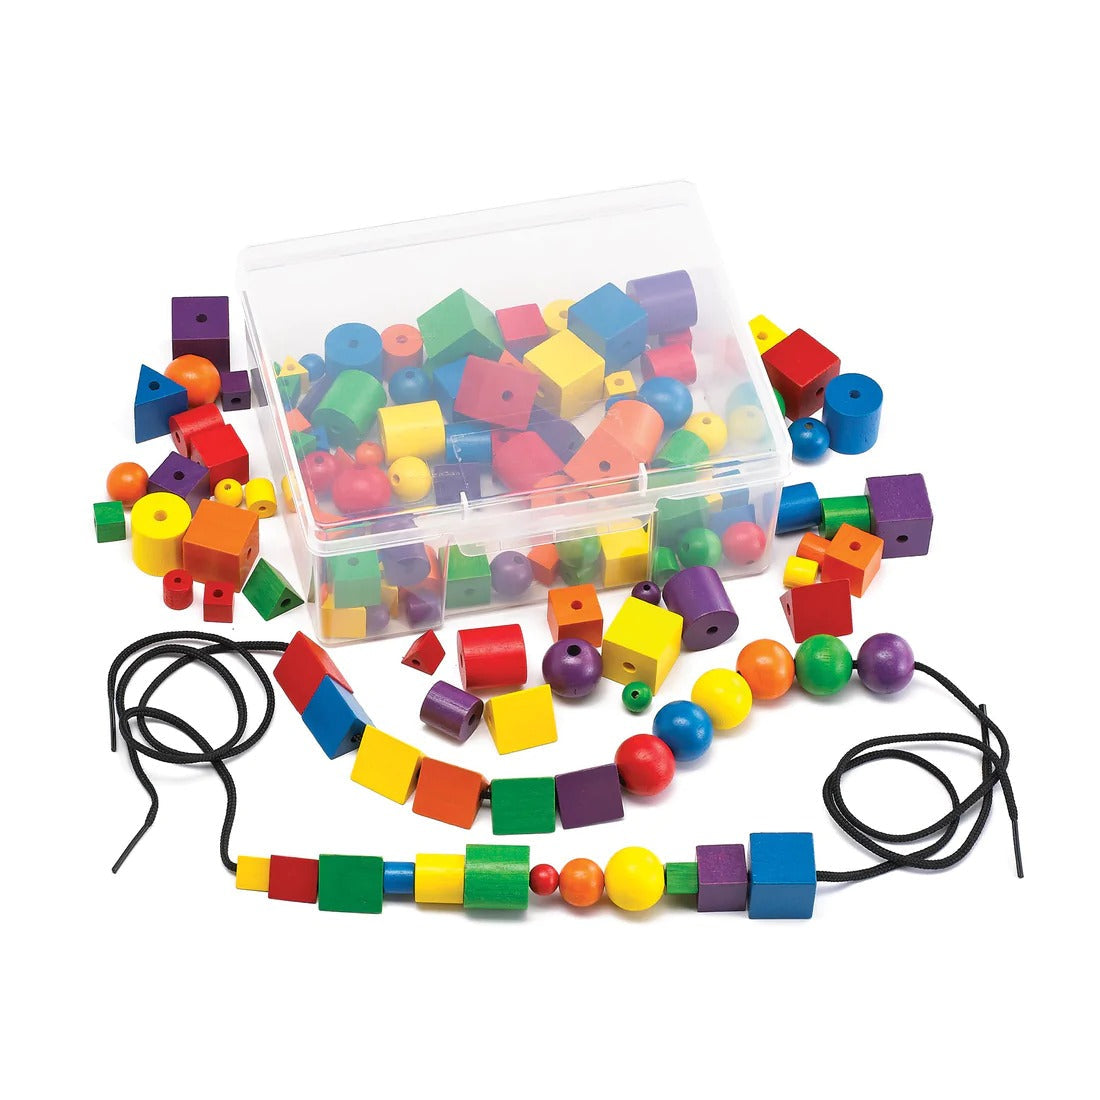 Wooden Attribute Beads - Pk144, write product lacing beads The Wooden Attribute Beads are a fun and interactive way to learn about shapes, size and colour Each bead has a threading hole making them great for lacing activities. Ideal for sorting, classifying by attribute, sequencing, pattern making and talking about geometric shapes.The Wooden Attribute Beads set includes a wide variety of shapes and colours, providing endless possibilities for learning and play. The beads are also perfect for developing han